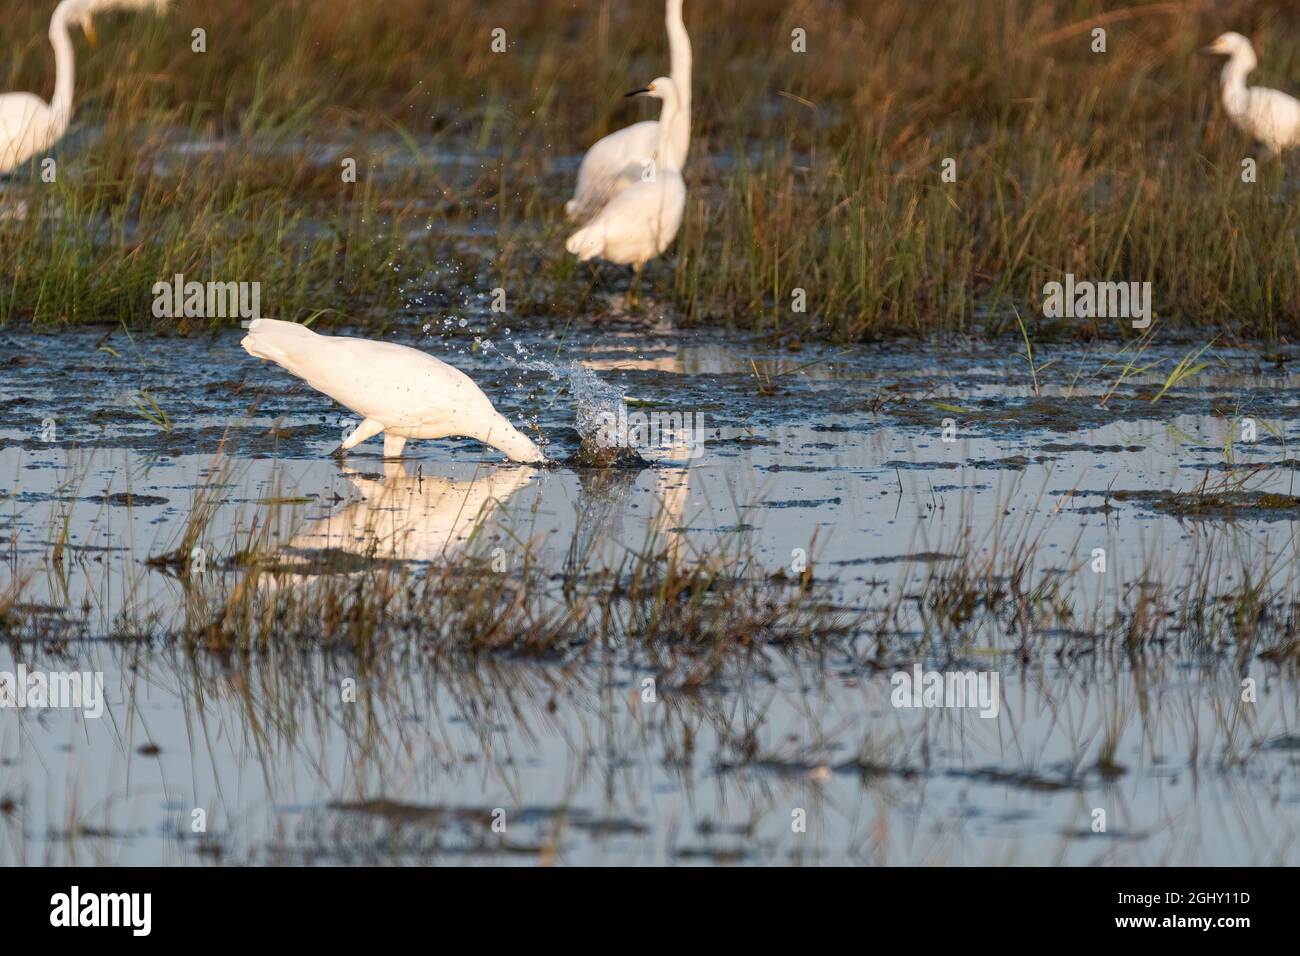 A Great White Egret making a splash as it plunges its beak into the water of a grassy marsh in an attempt to catch a fish. Stock Photo